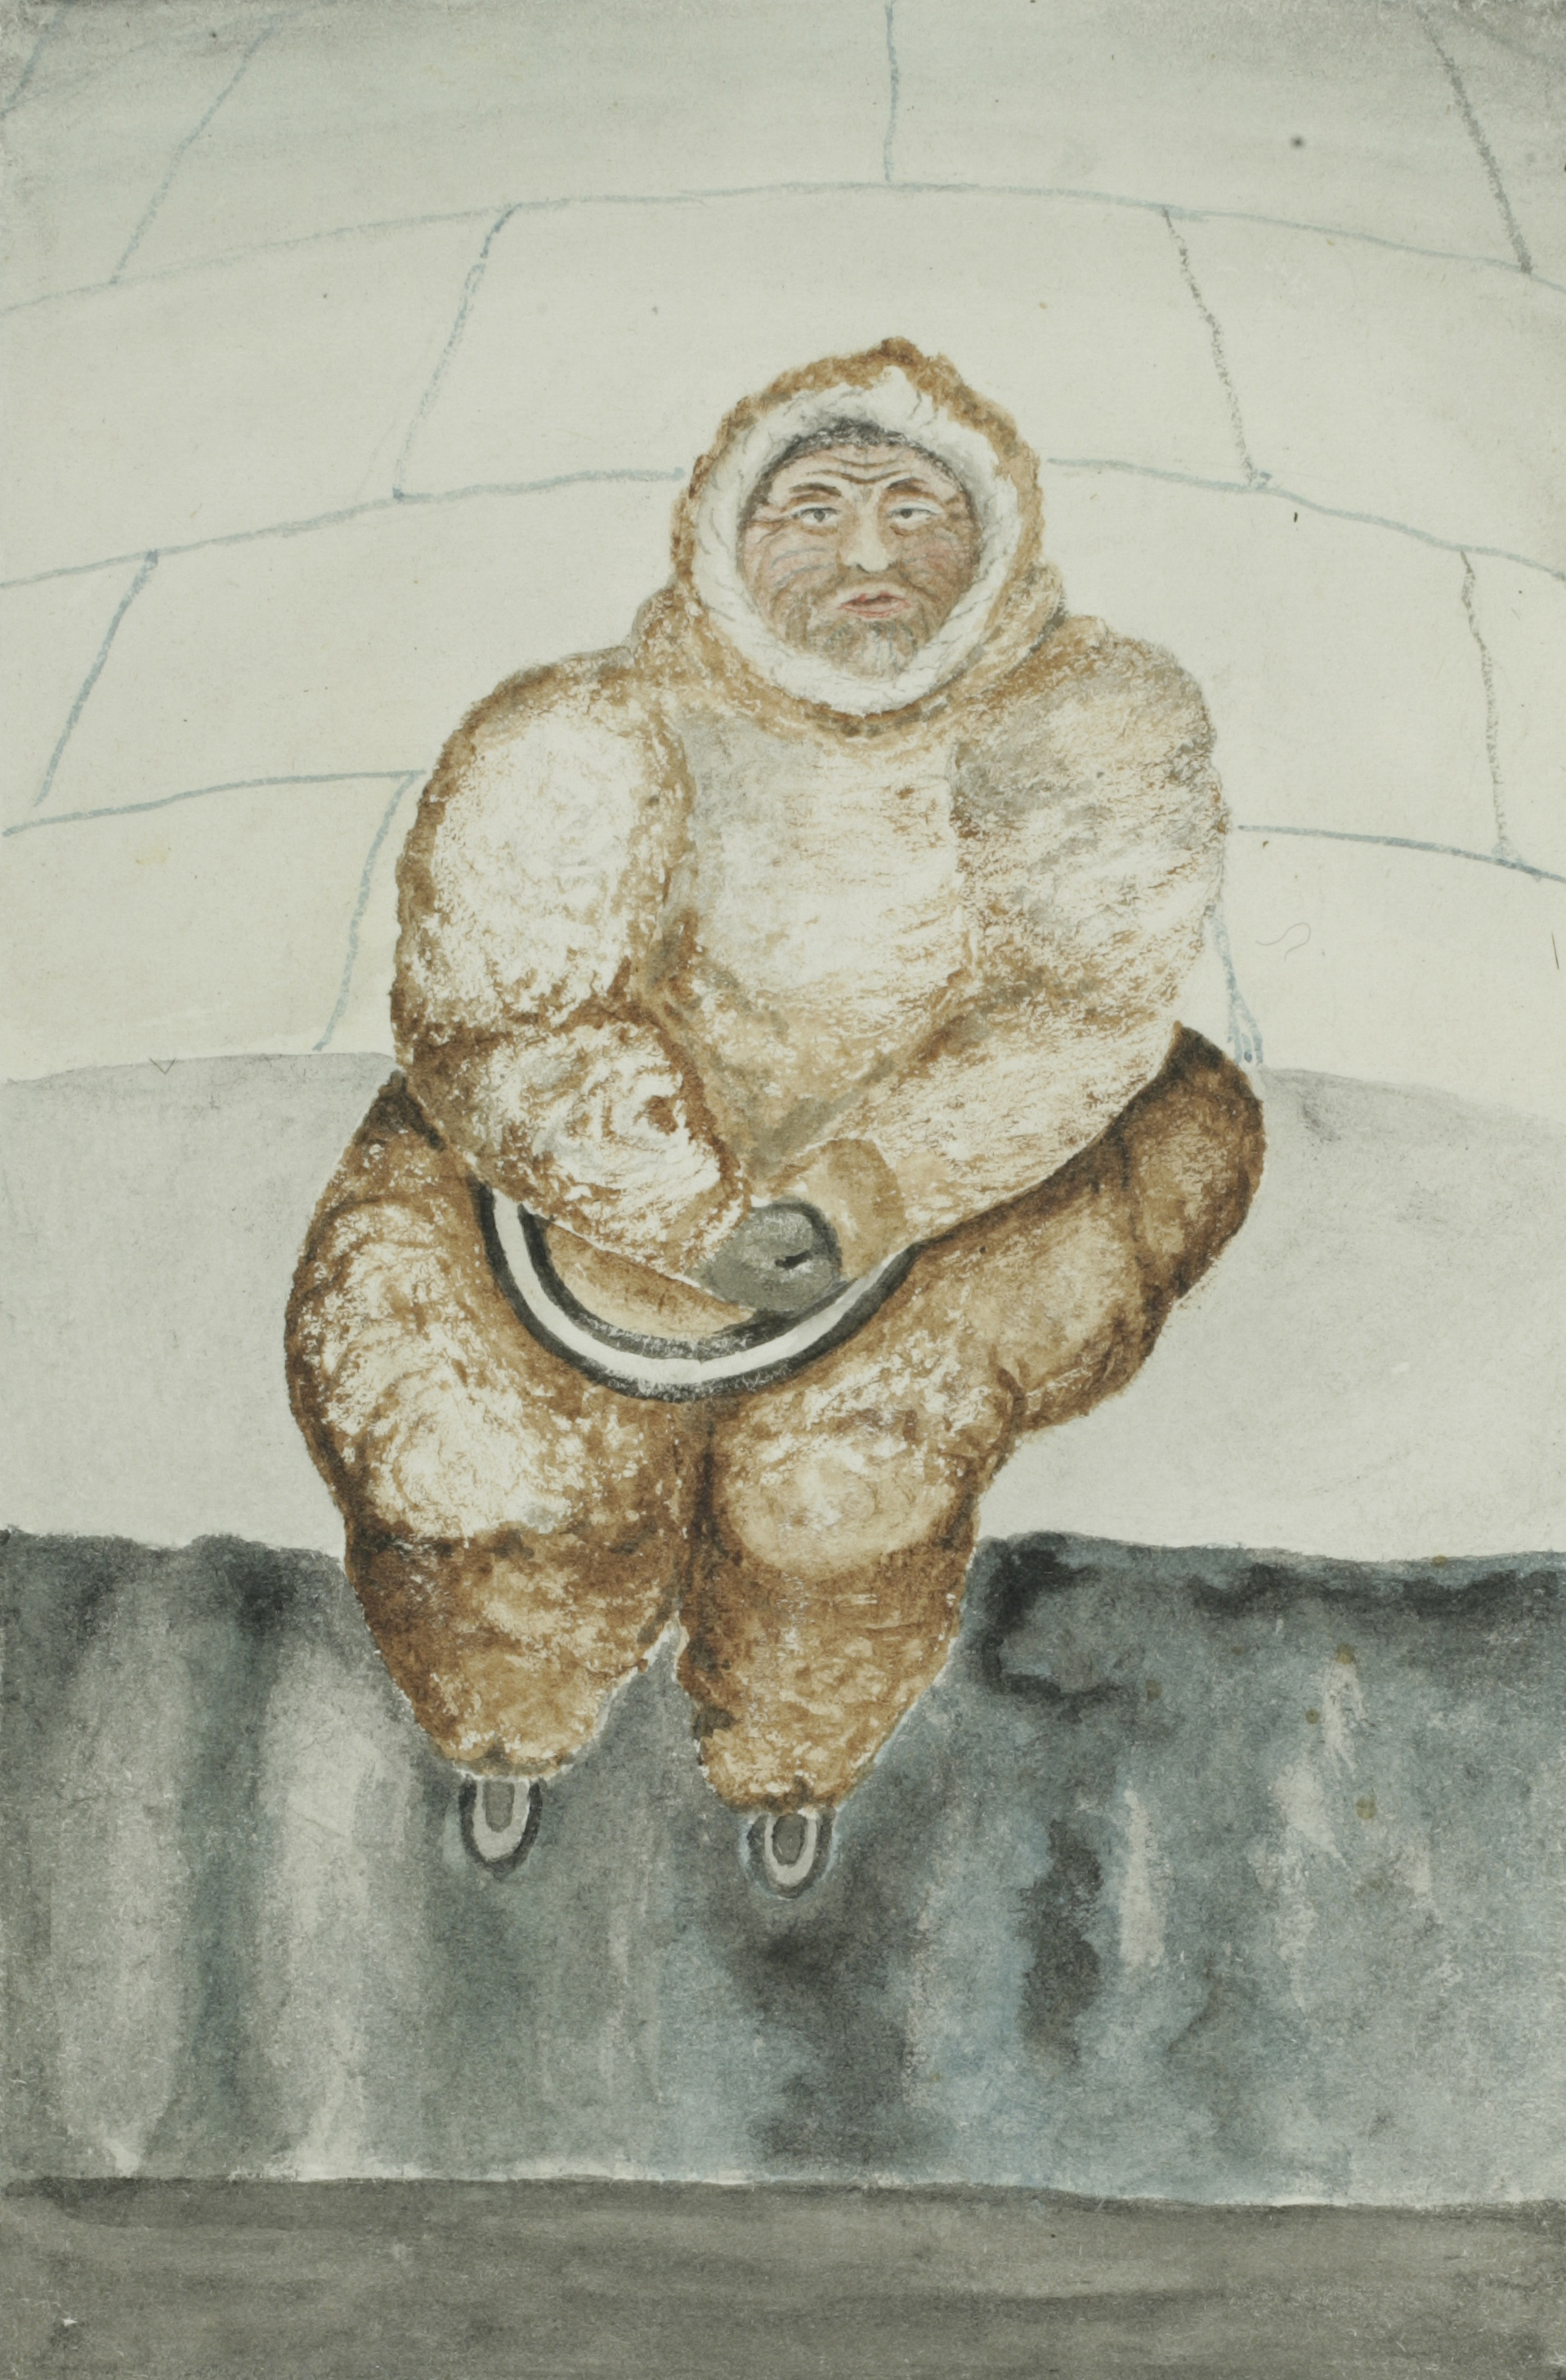 Kanguagiu is shown sitting by the wall, and is dressed in brown furs from head to foot. She looks out seriously from inside her fur hood, which reveals a hint of her gray hair. Her forehead is lined and her face is tattooed with blue lines. Her hands wear mittens and are clasped in her lap. The watercolour is amateur but evokes the thick fur of her clothes well.